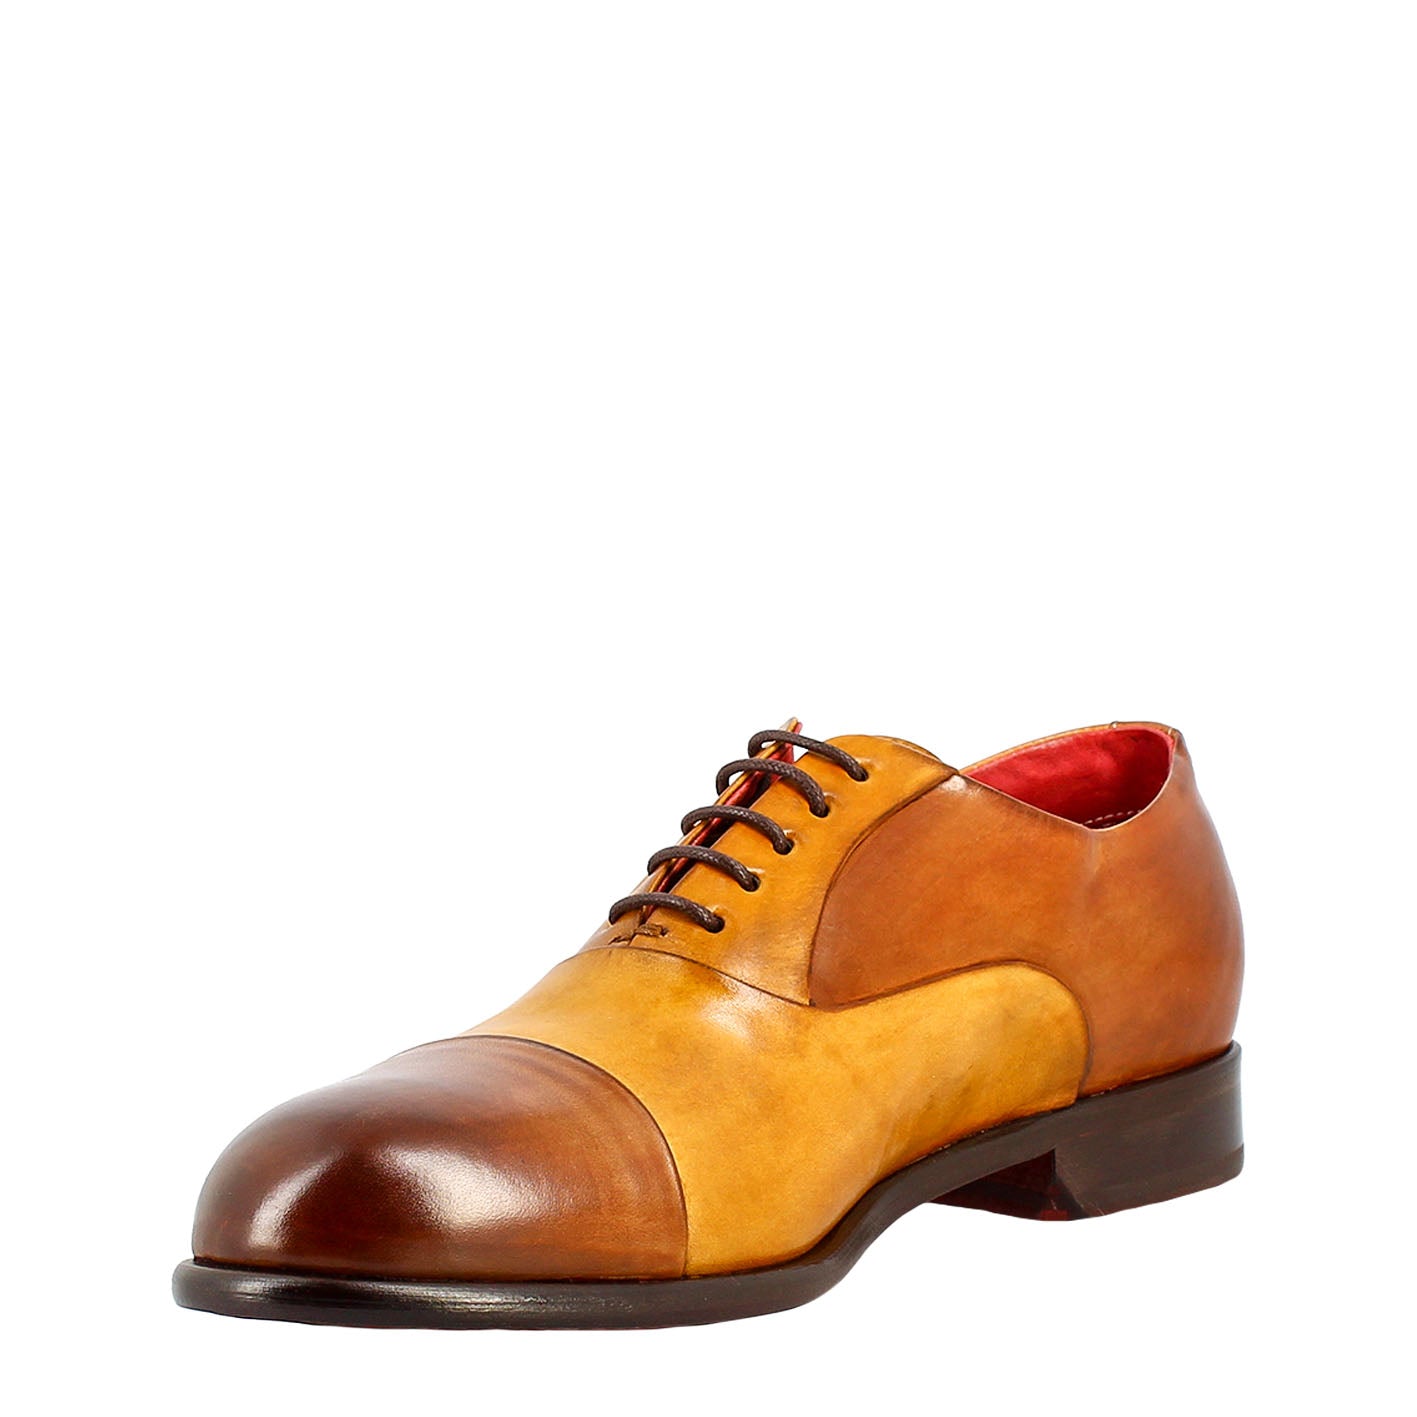 Elegant men's brown and yellow oxford in leather and red lining